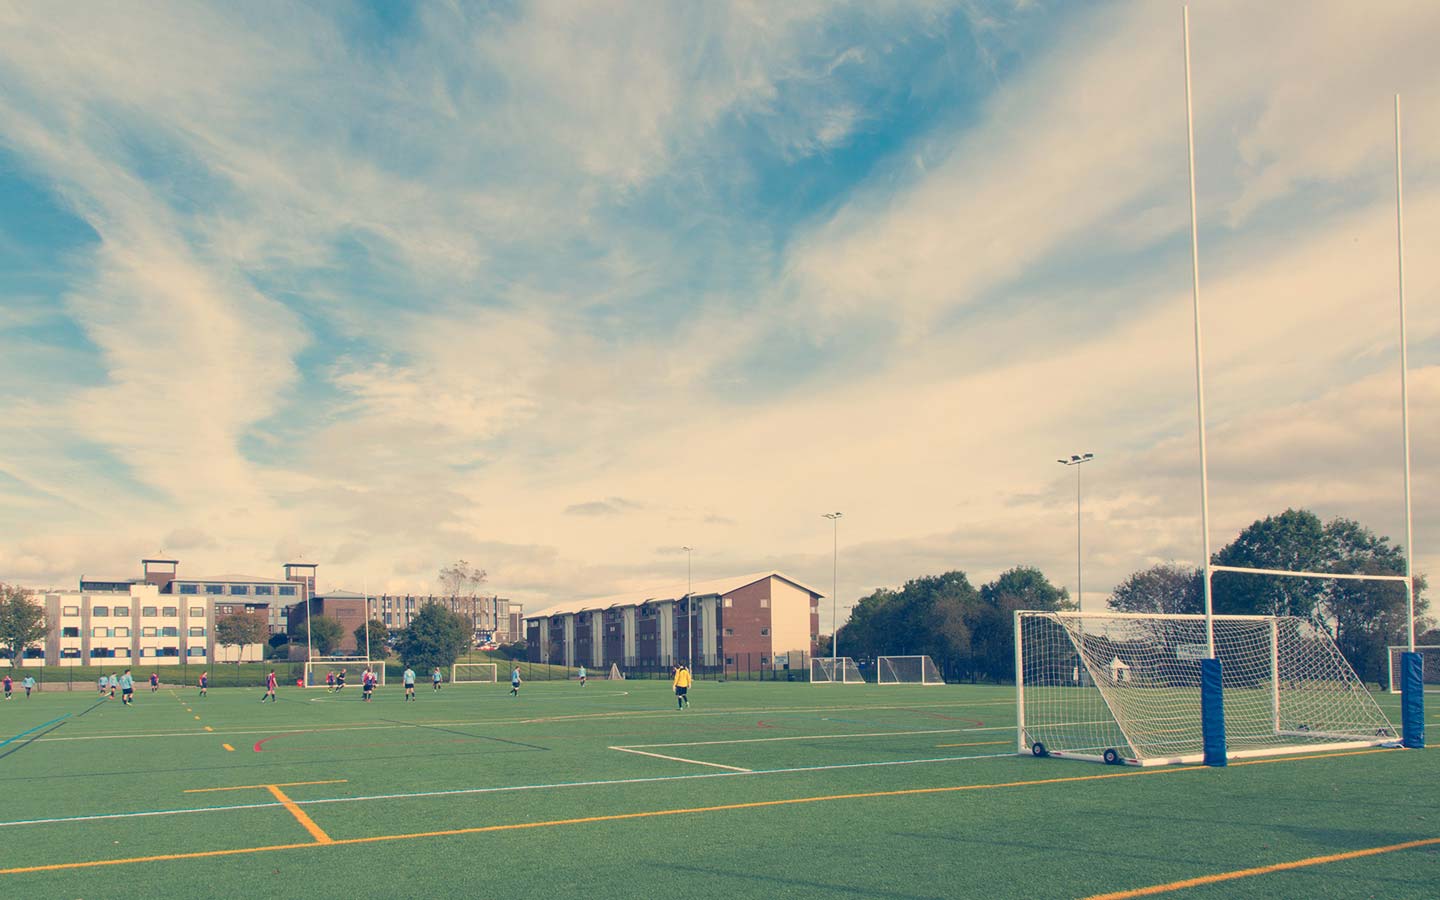 Sport Centre - Facilities & Services - 3G Pitch